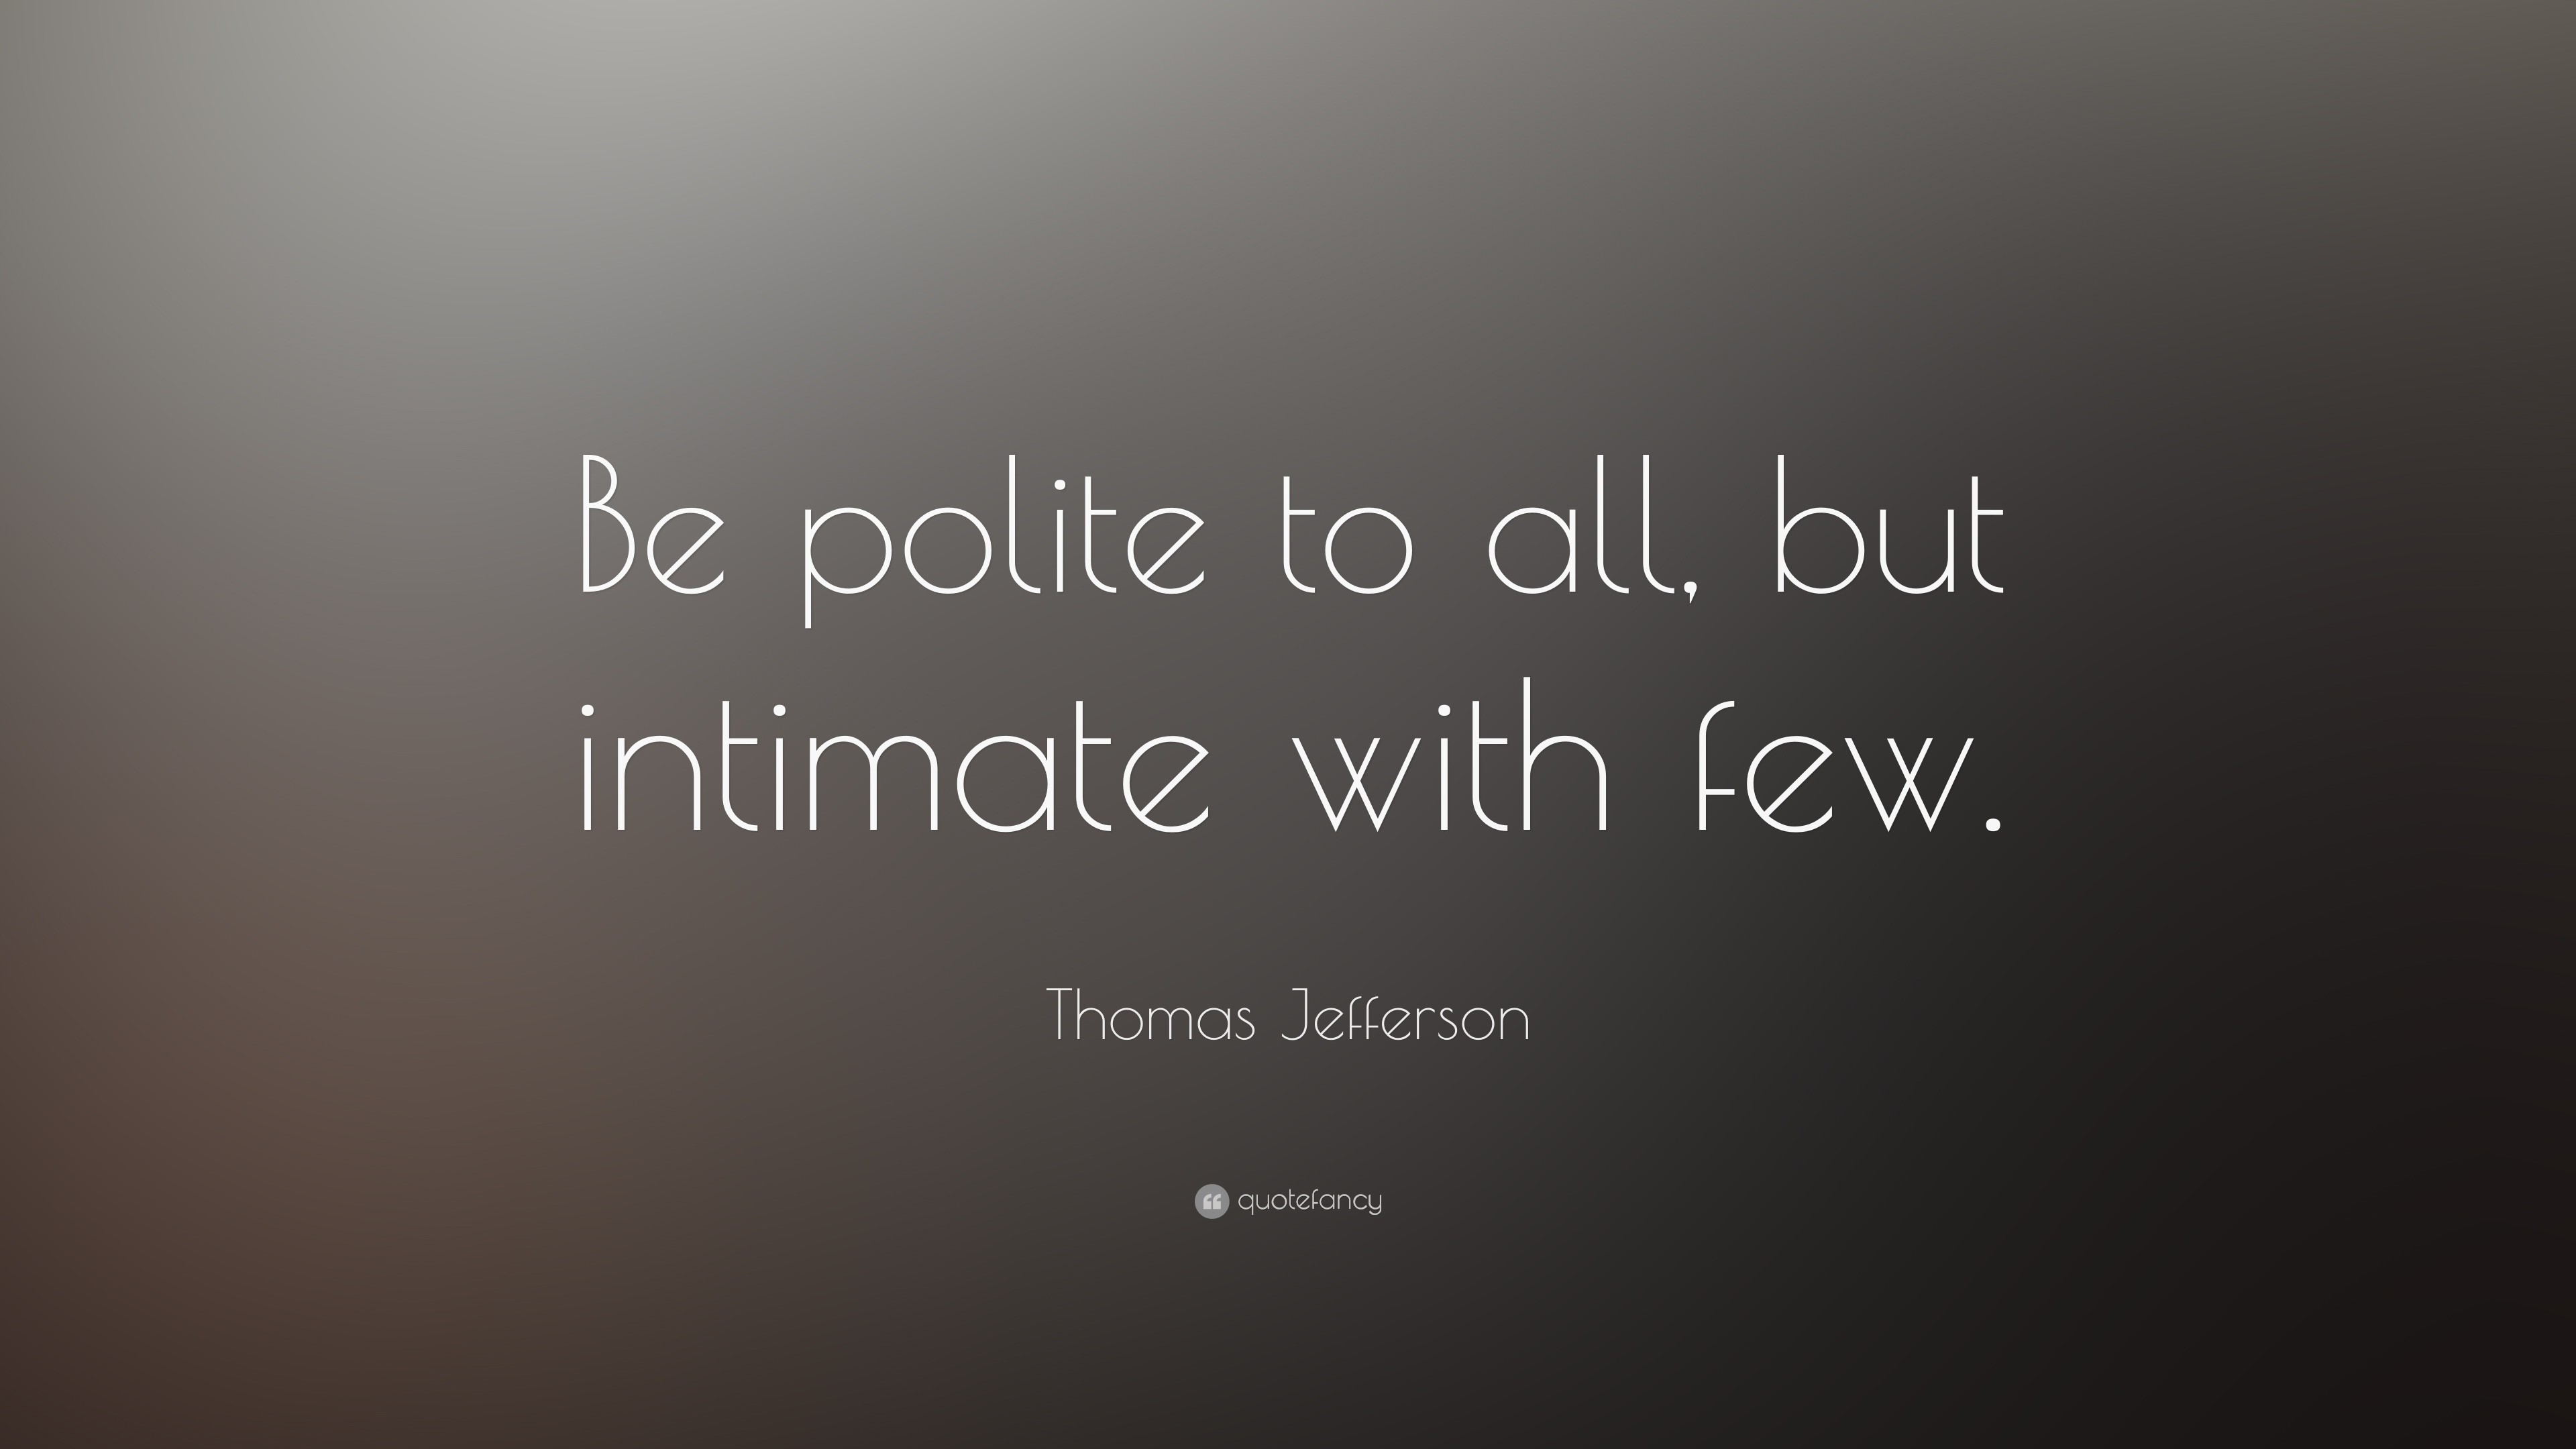 3840x2160 Thomas Jefferson Quote: “Be polite to all, but intimate with few.”